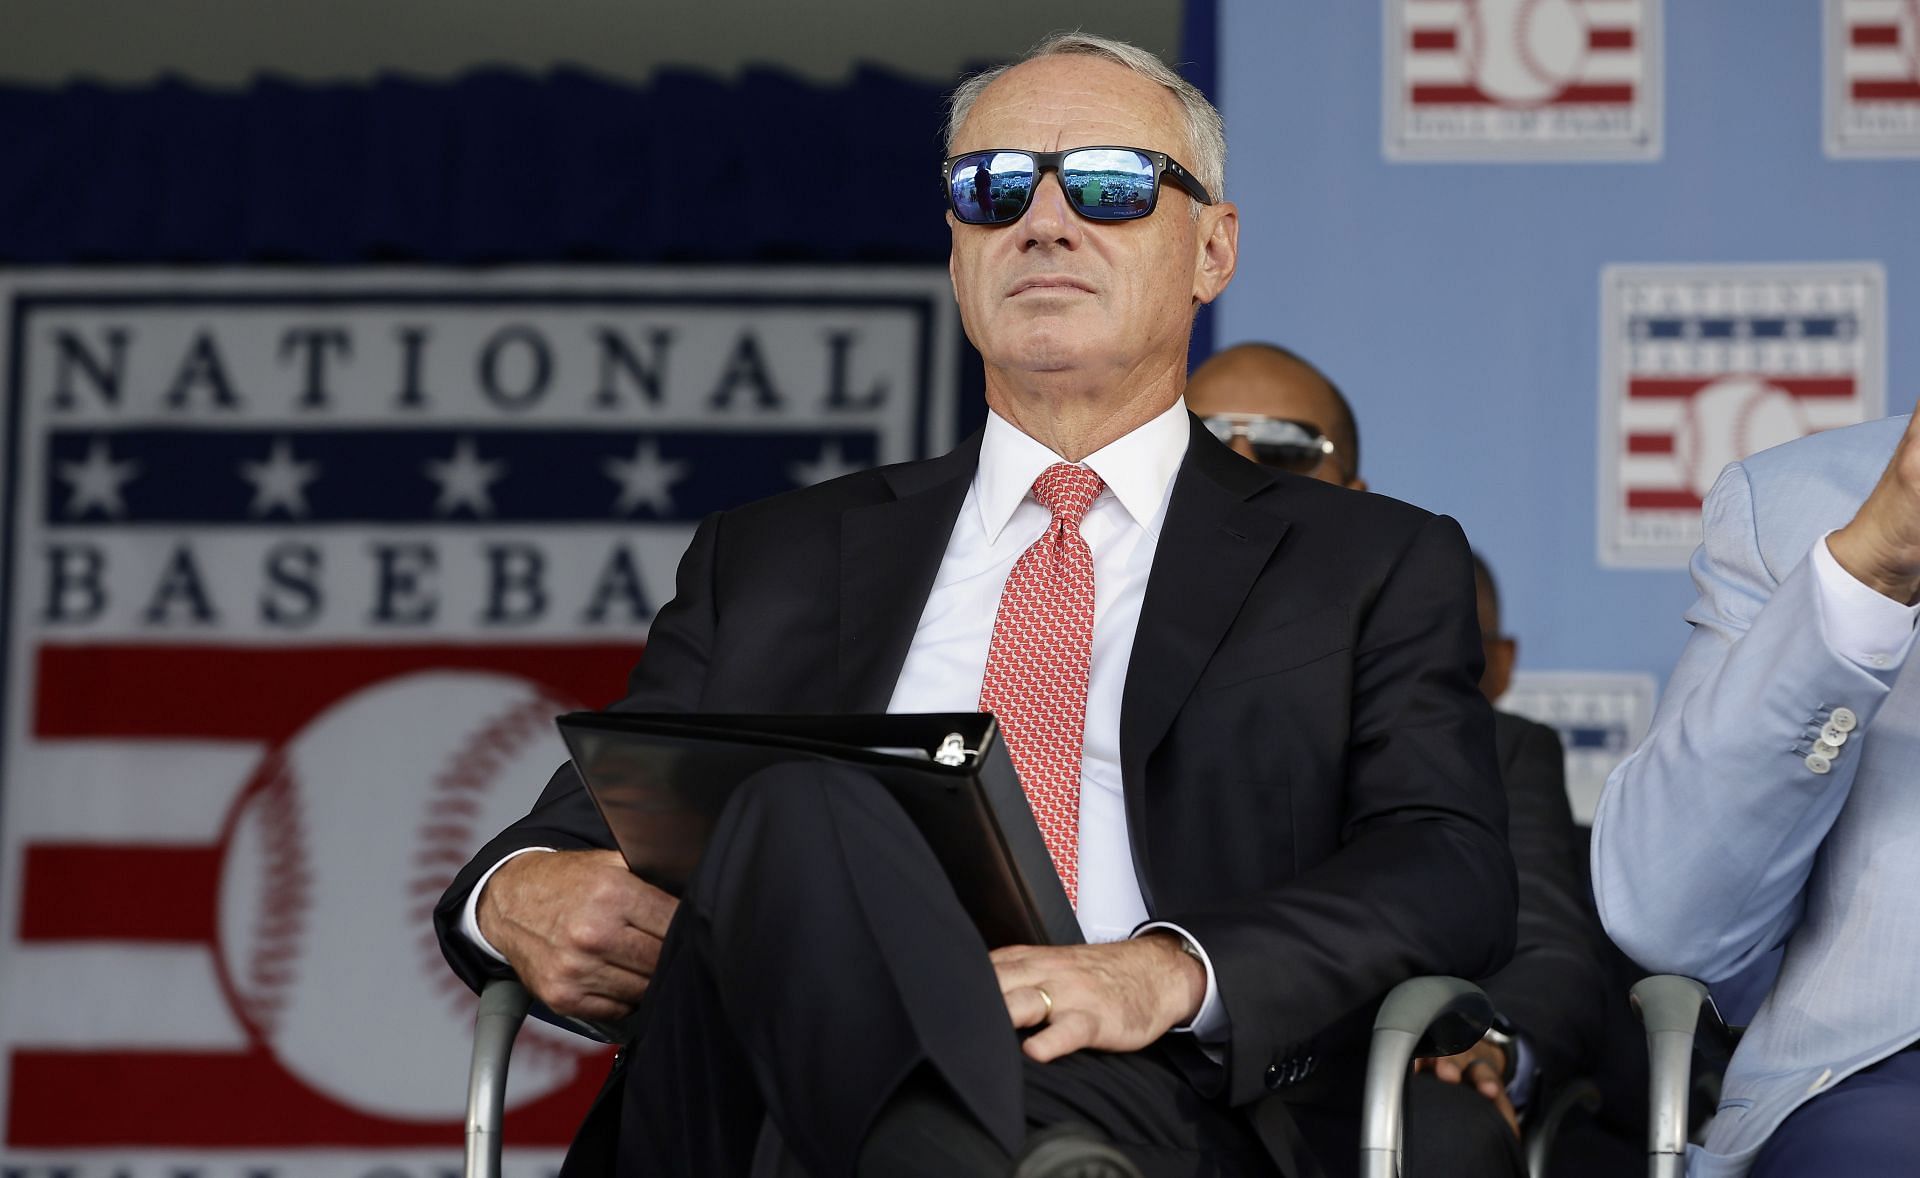 Rob Manfred hoped for MLB growth